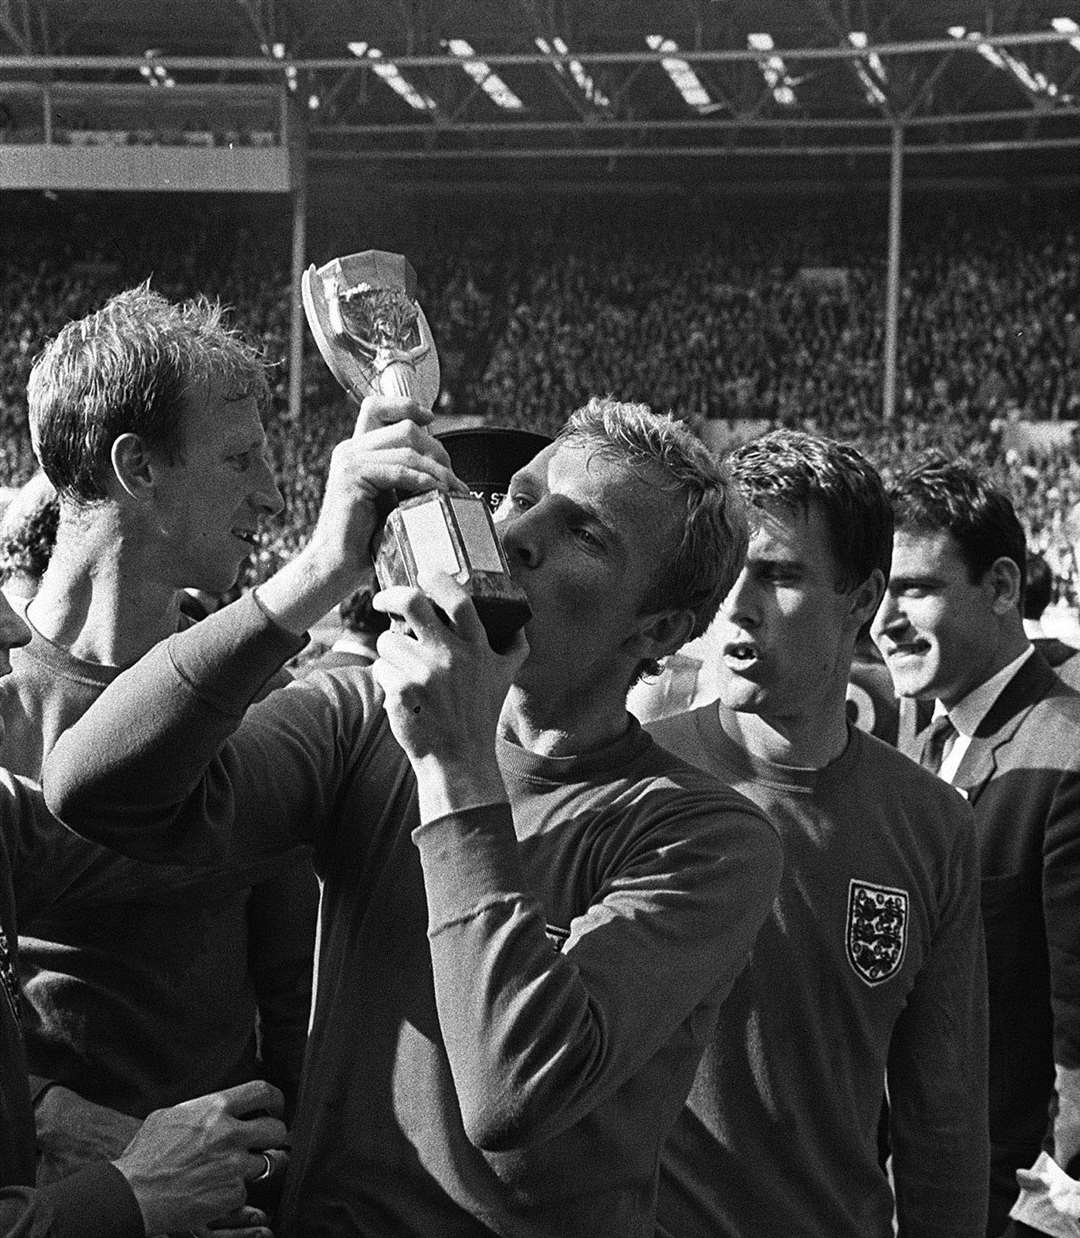 Bobby Moore planting an enthusiastic kiss on the World Cup trophy after England's historic victory over West Germany in the World Cup in1966. Picture: PA